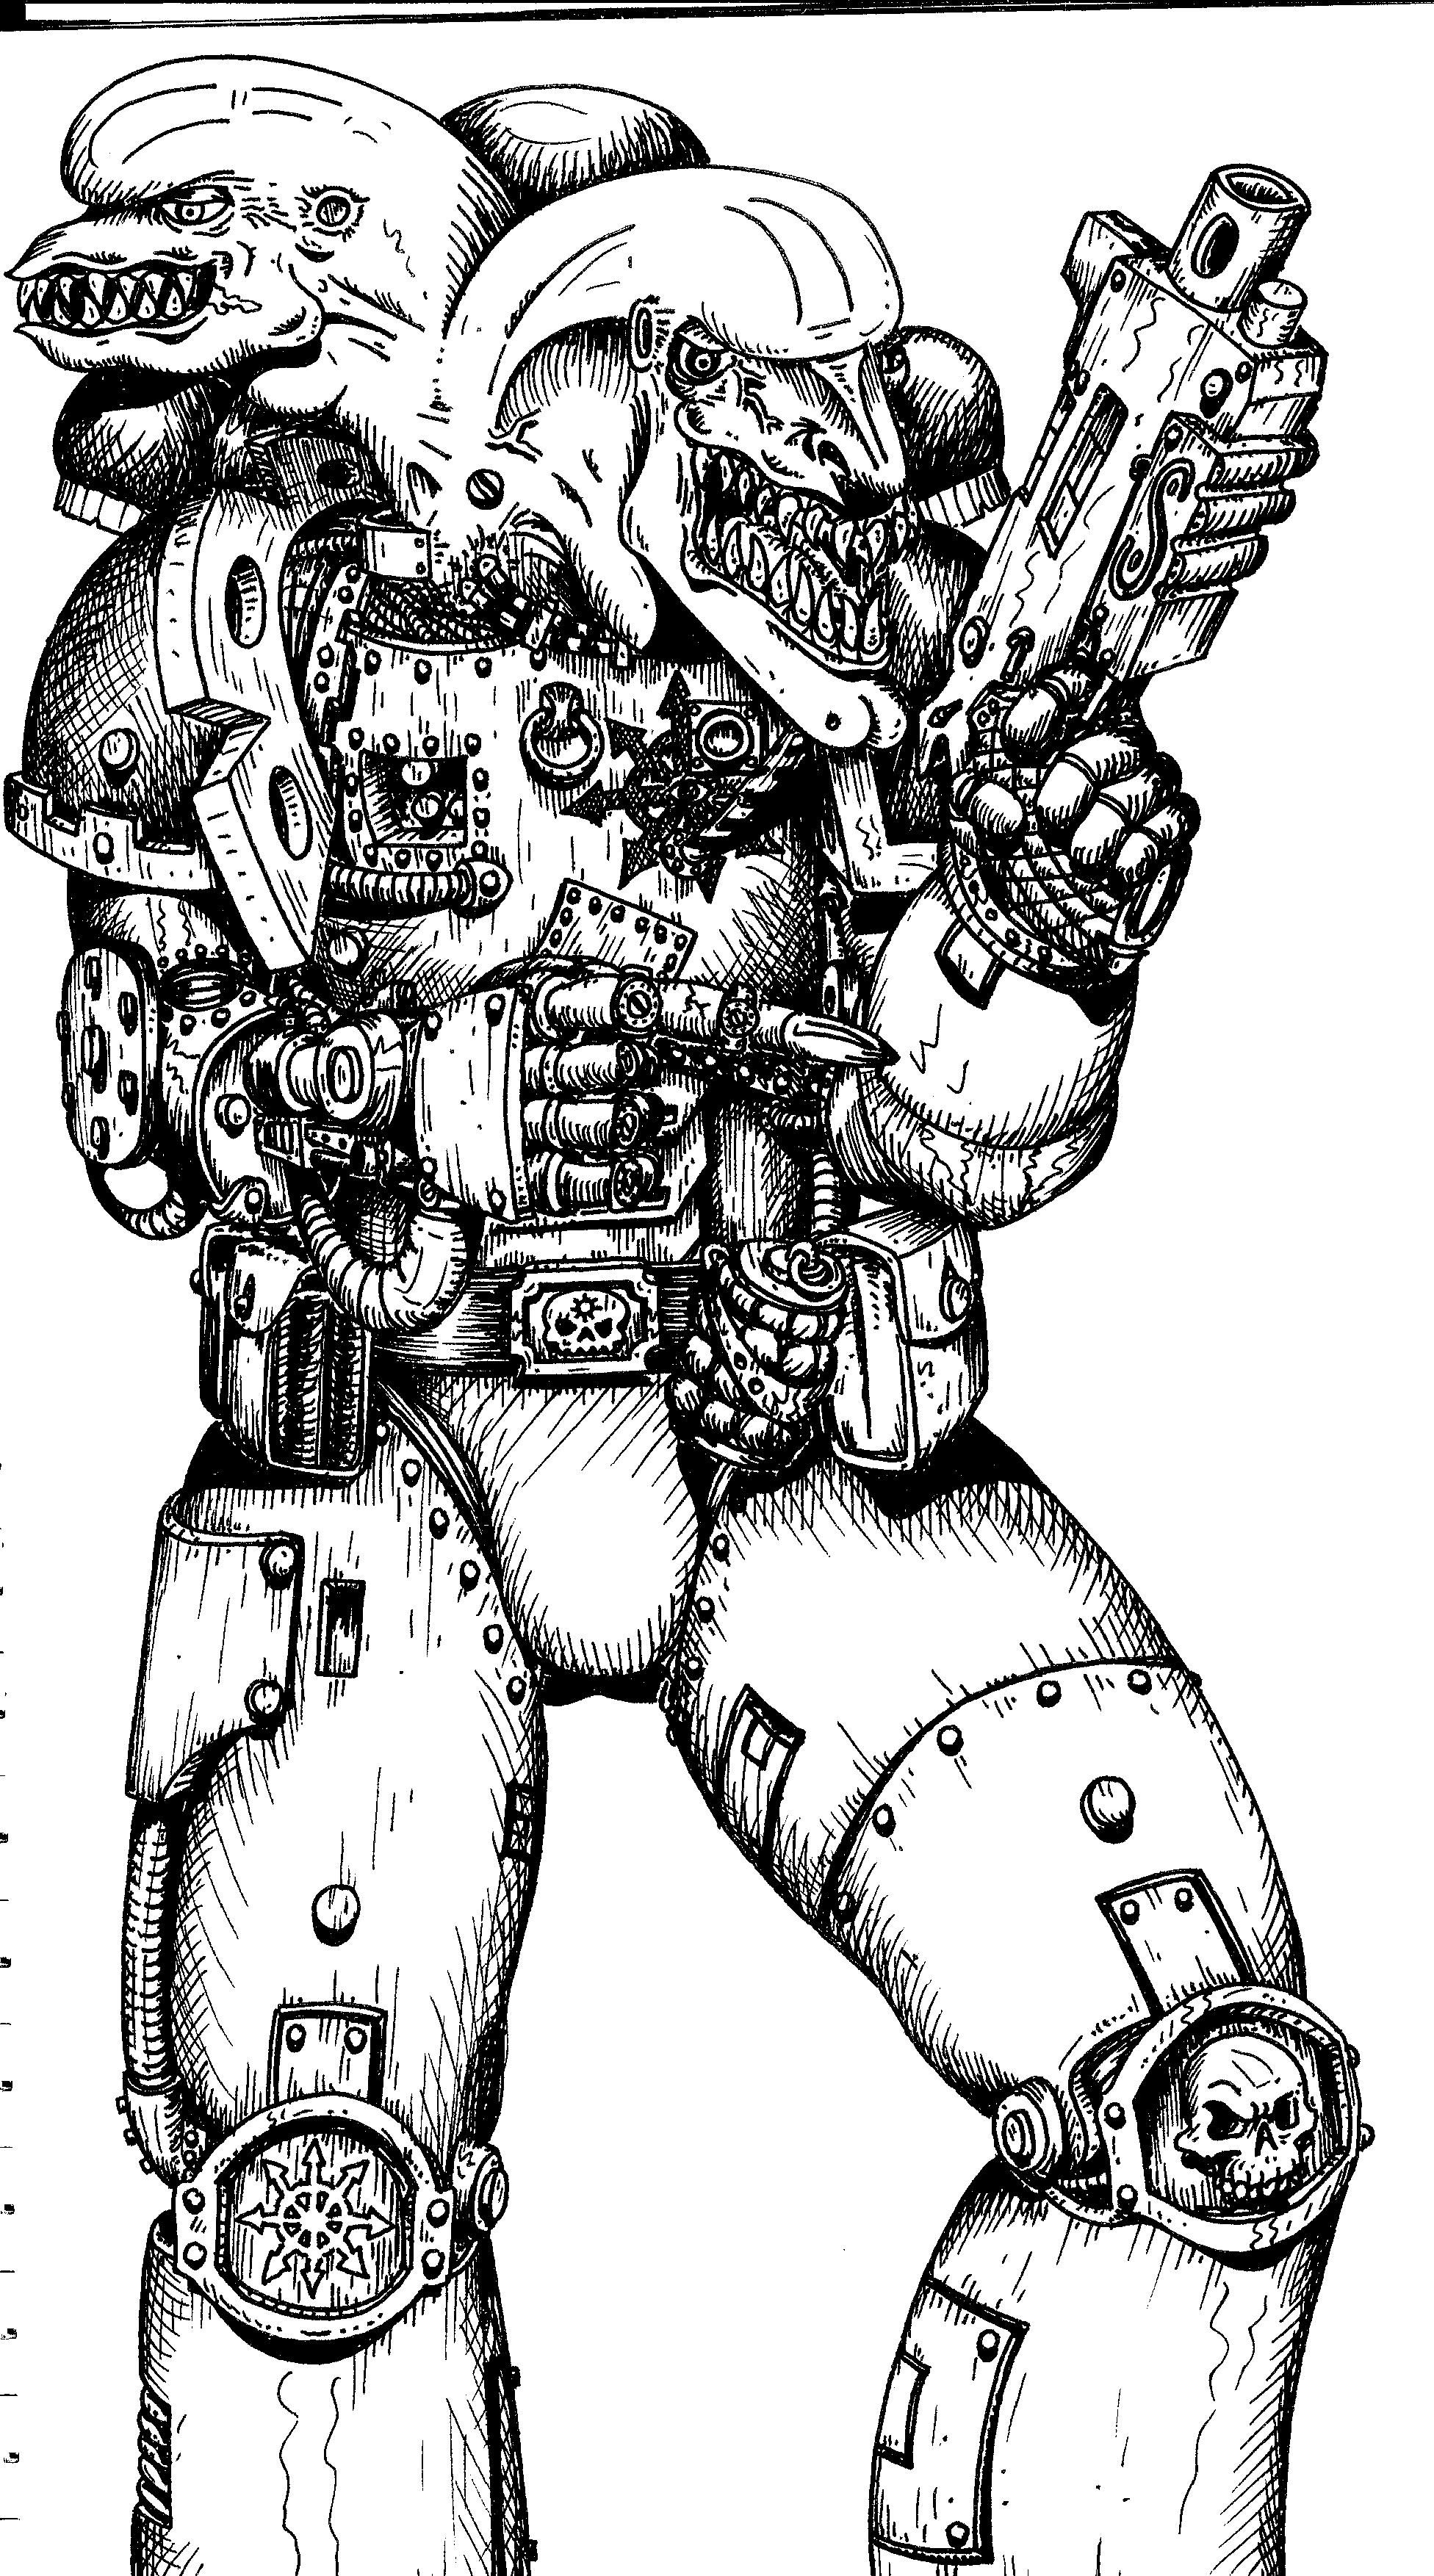 80´s, Artwork, Chaos, Chaos Space Marines, Conversion, Cool, Crazy, Cw, Dark, Dead, Drawing, Drawings, Eldar, Energie, First Edition, Heavy, Lotd, Nice, Nurgle, Old, Old Style, Op, Perfect, School, Space Marines, Style, Weapon